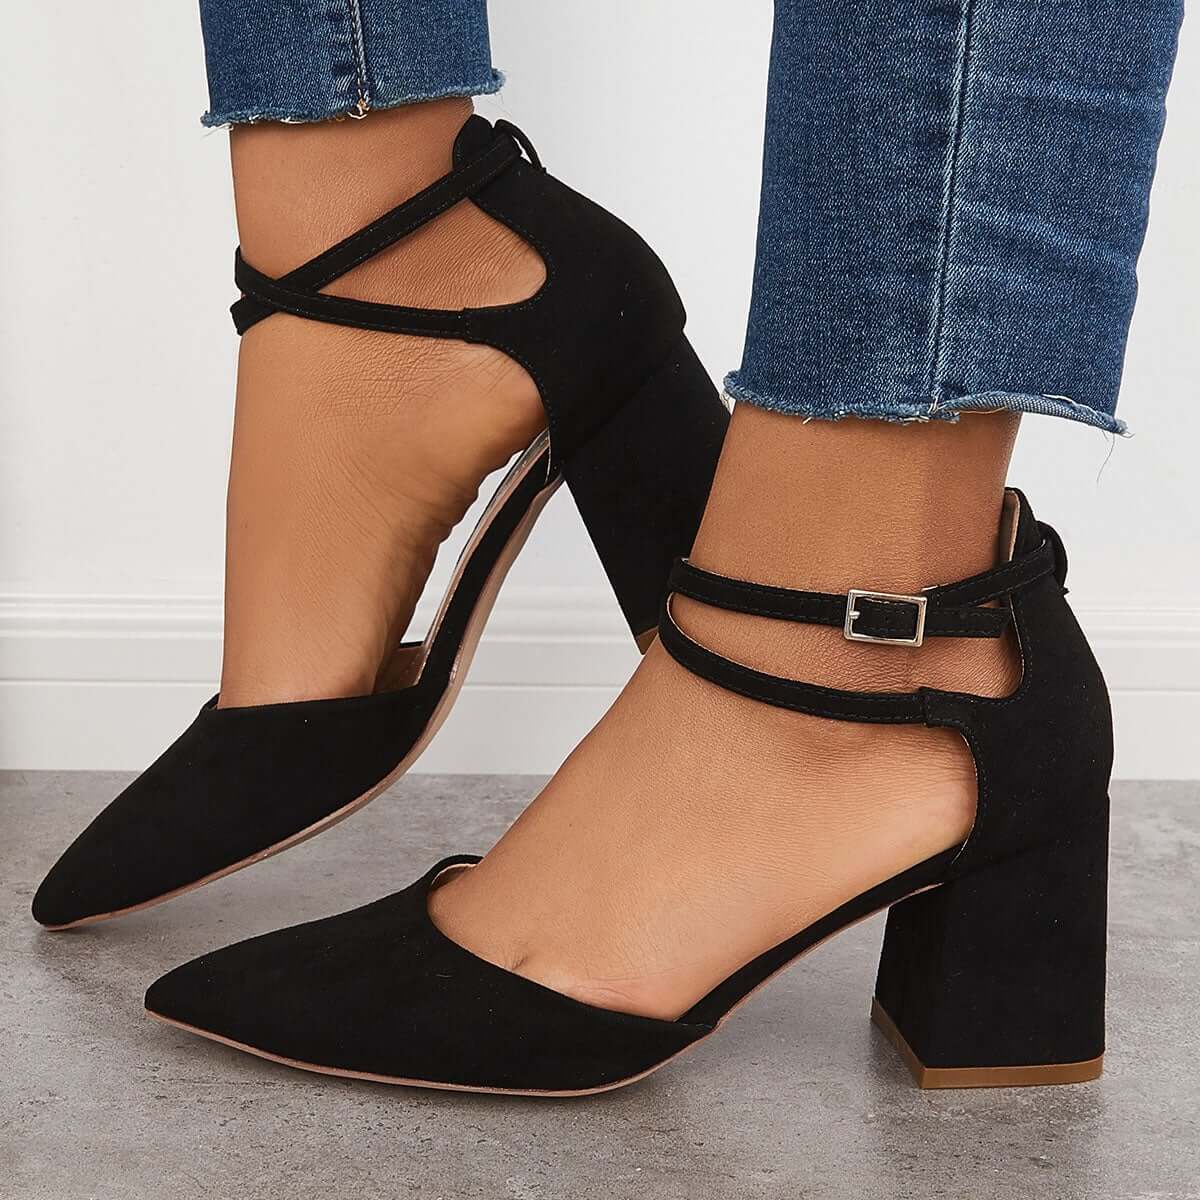 Chunky Block Low Heel Pumps Pointed Toe Ankle Strap Heels Pairmore